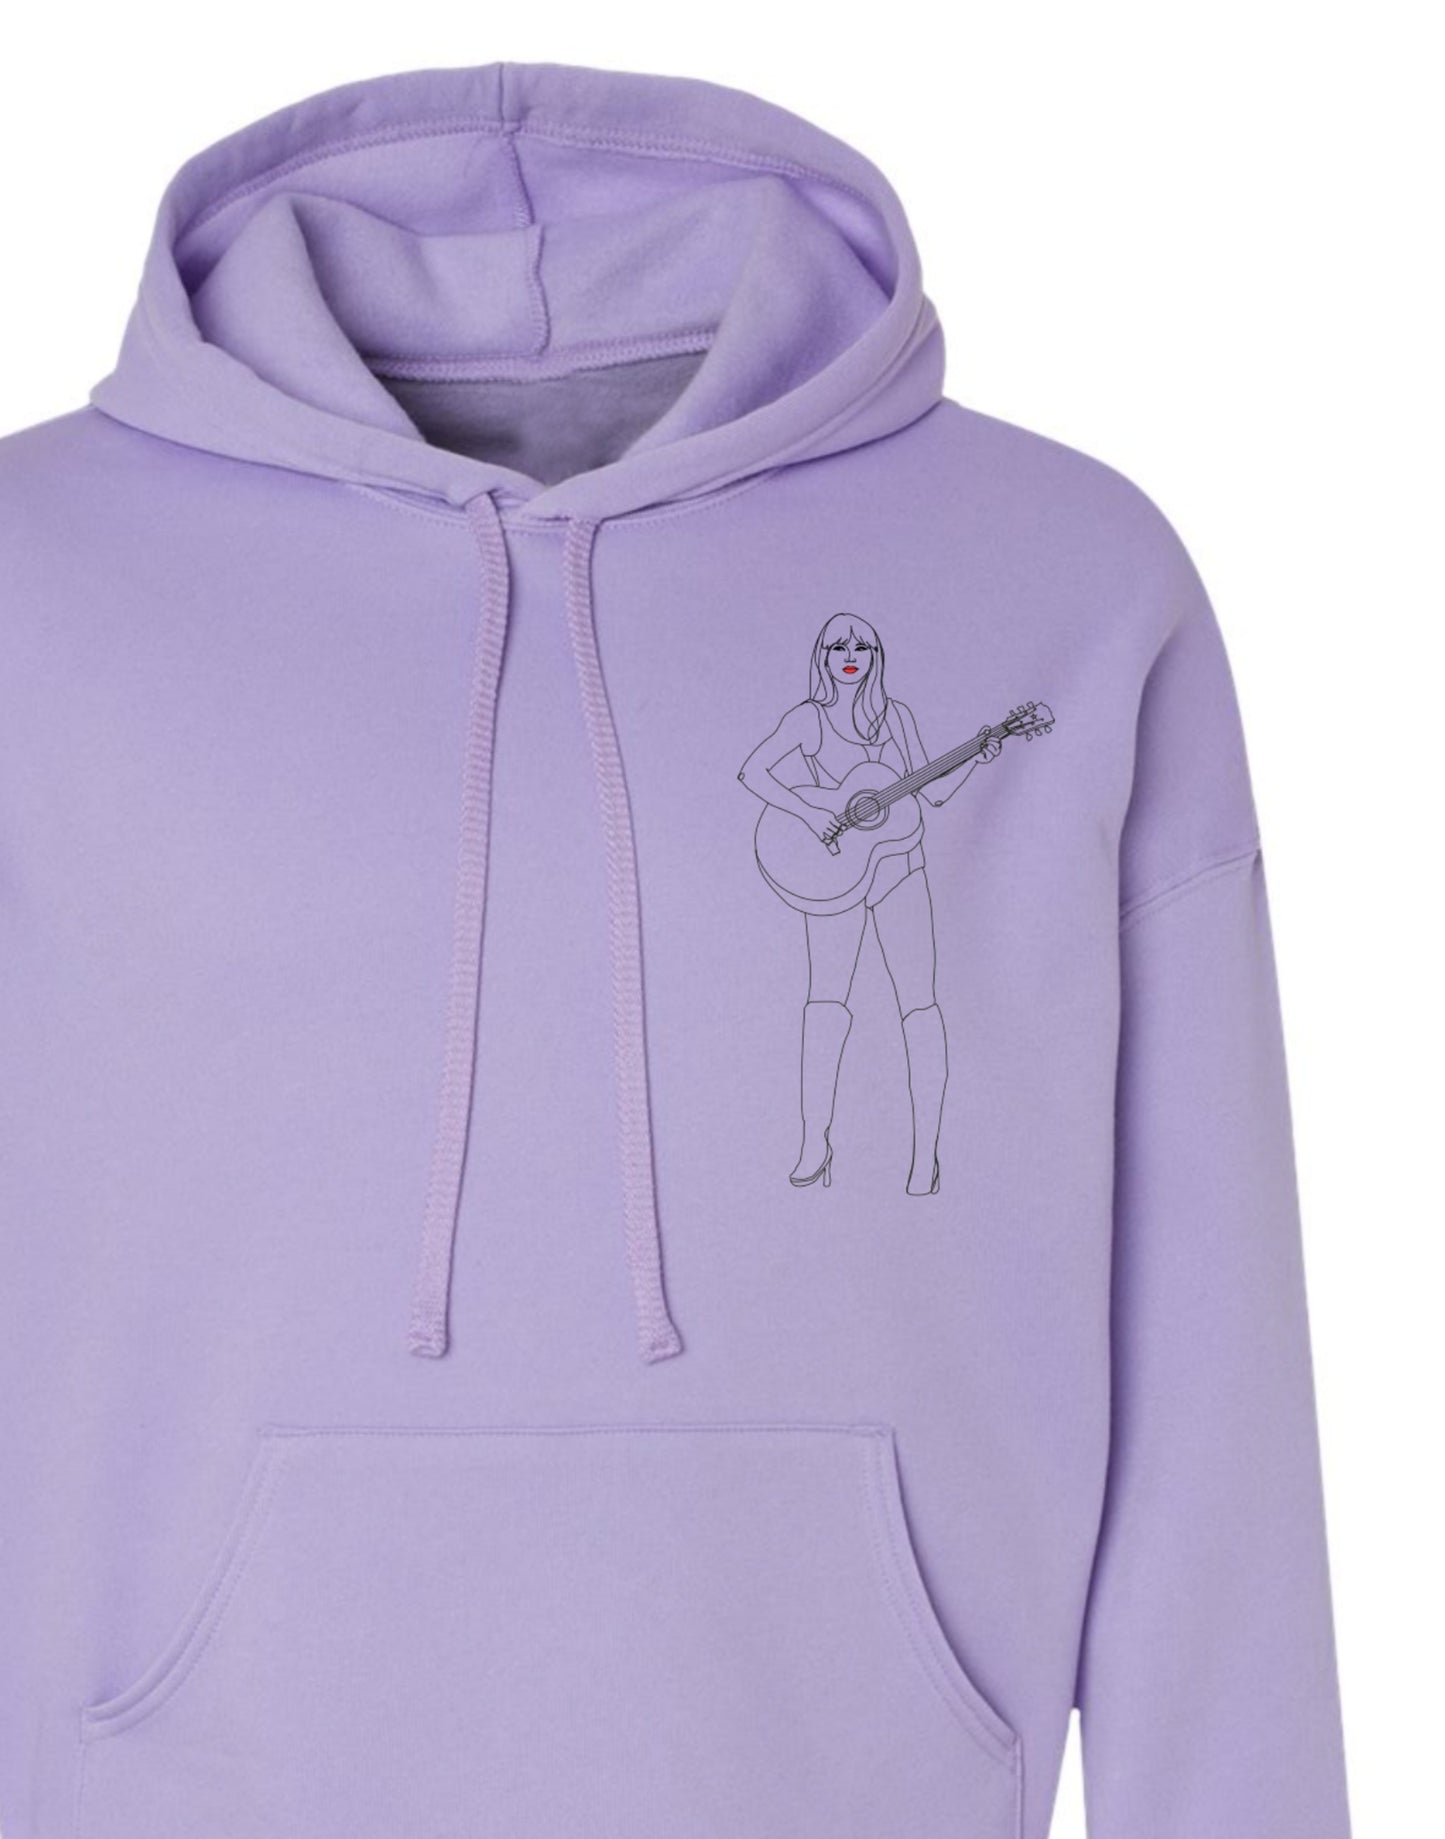 Taylor Pullover Hoodie Sweater